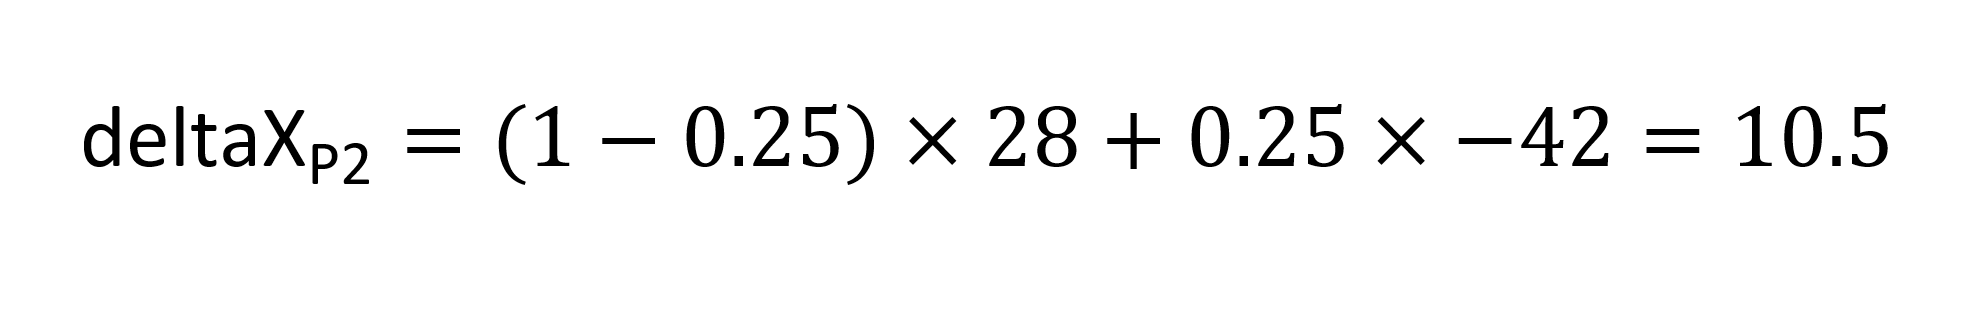 delta x for P2 equals 1 minus 0.25 quantity times 28 plus 0.25 times negative 42, which equals 10.5